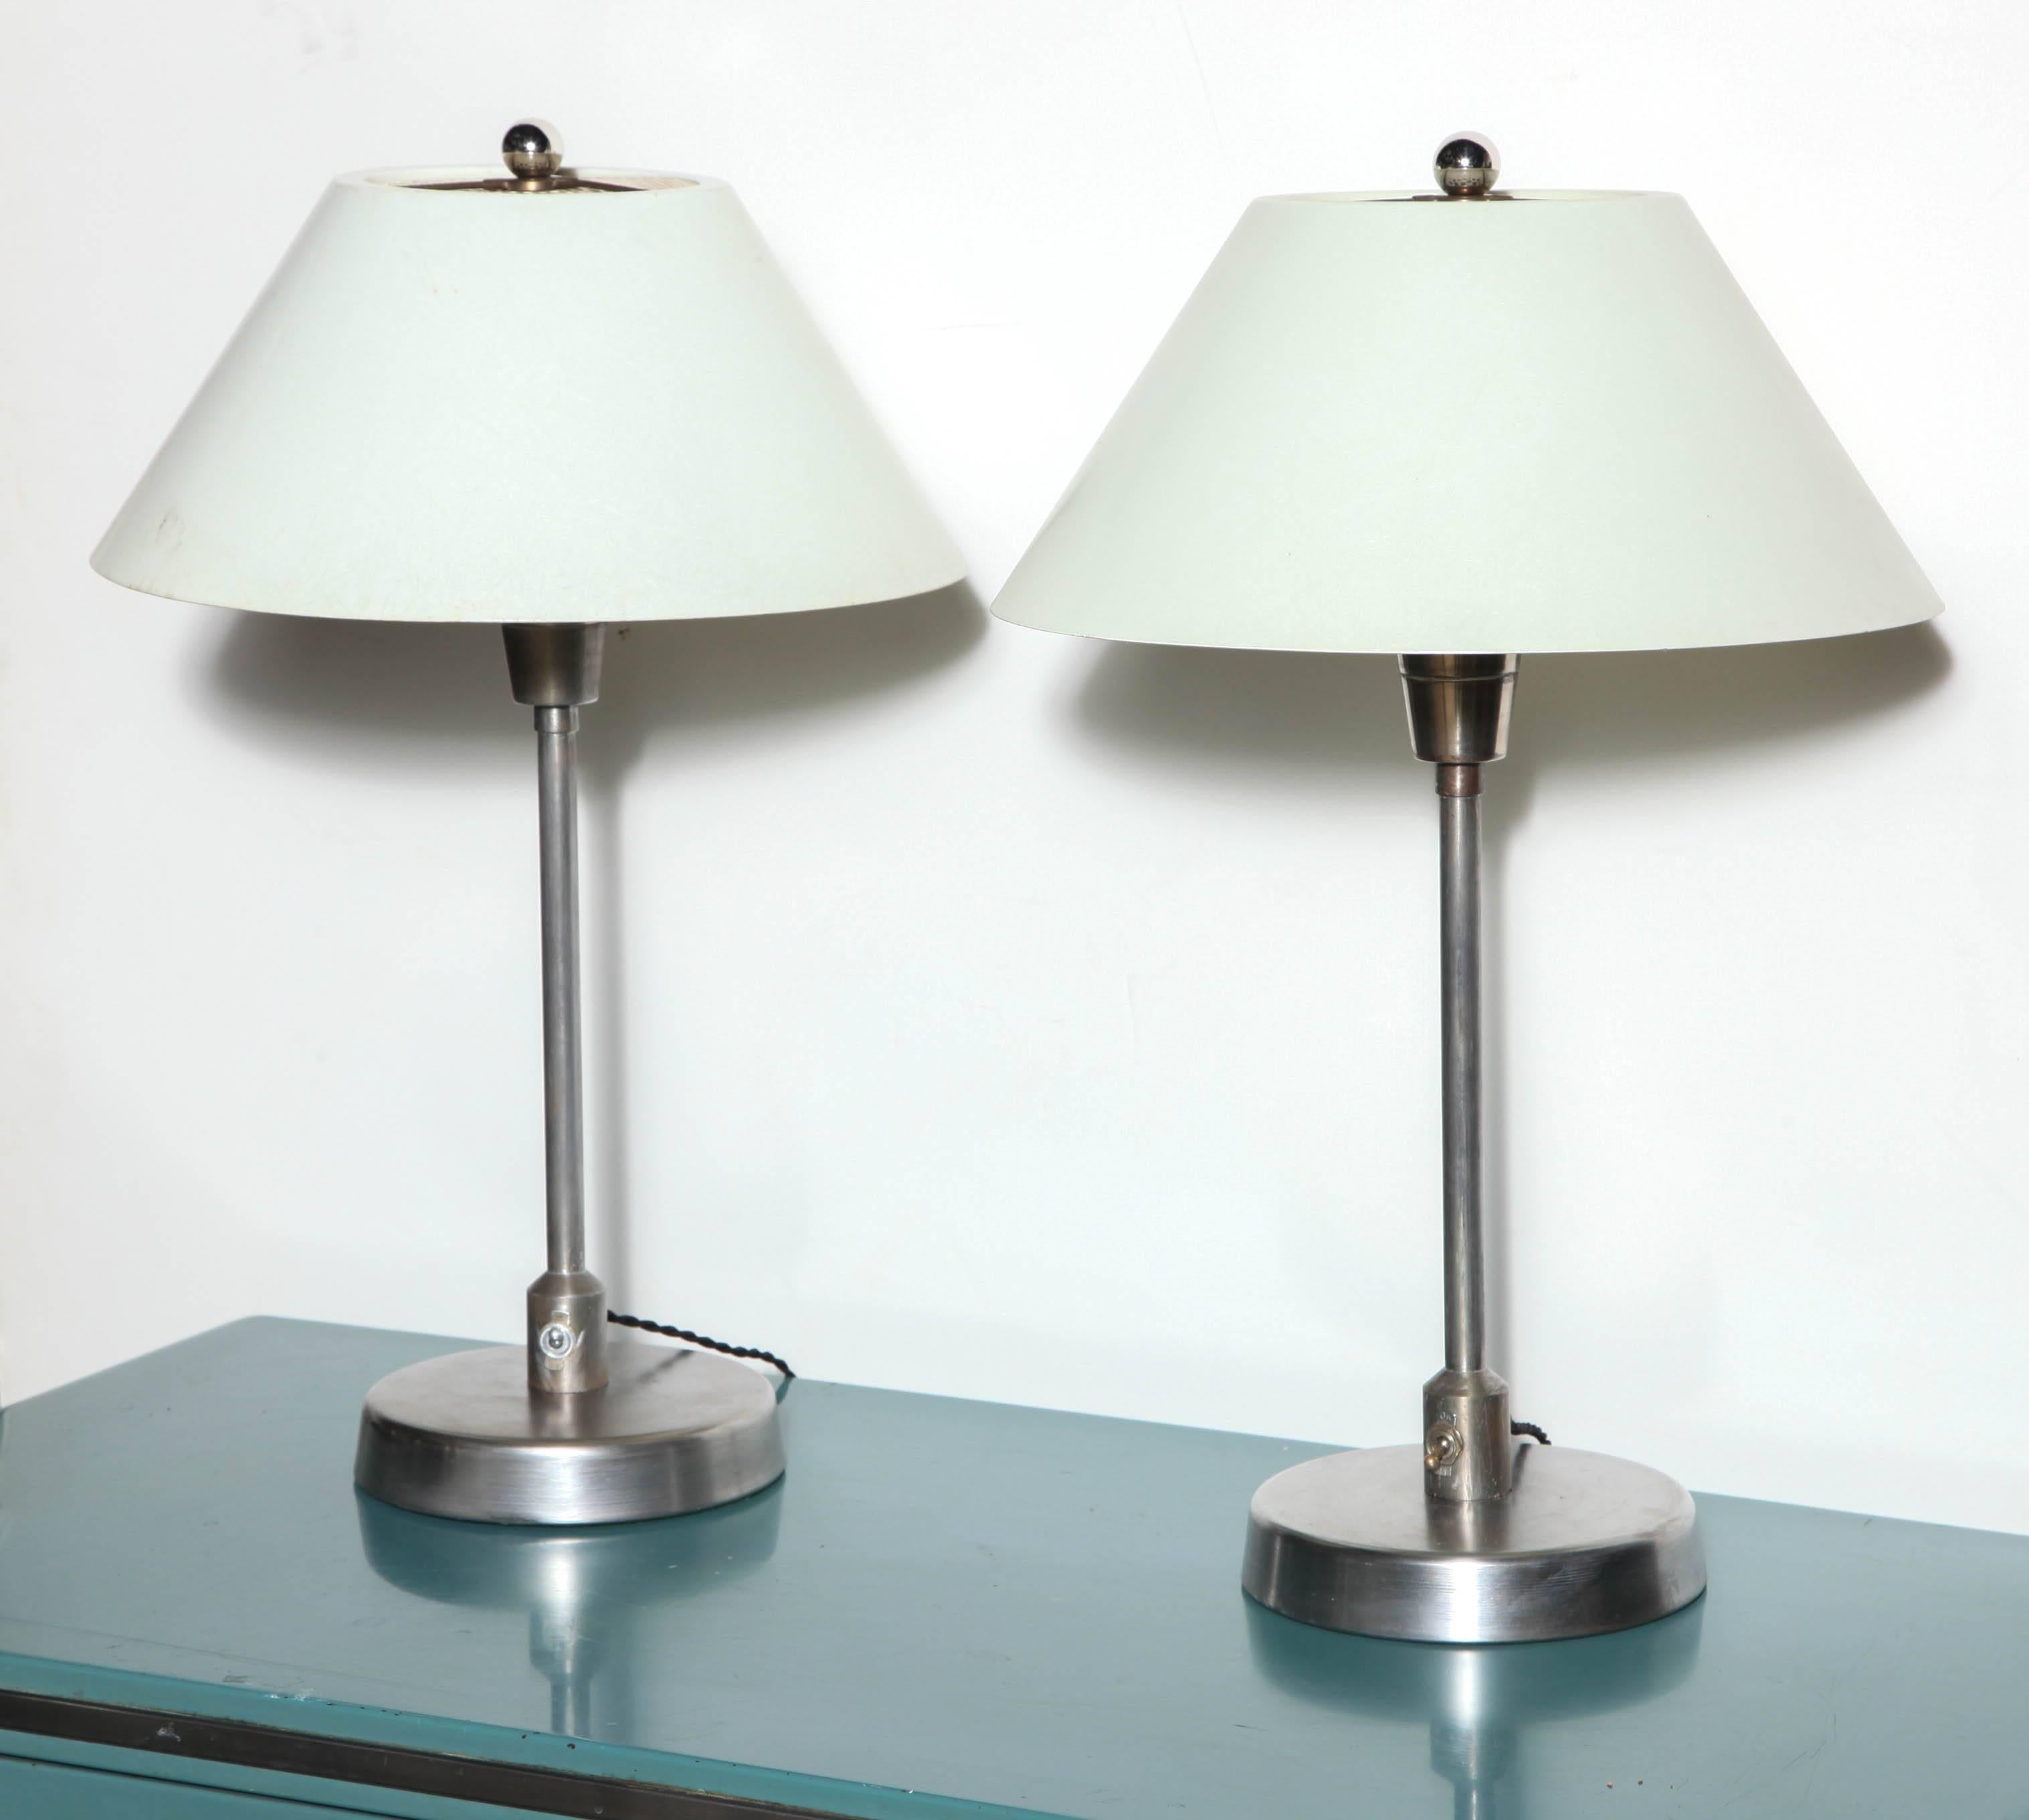 Pair of Industrial Steel & Fiberglass  Table Lamps. Featuring Steel columns, round 7